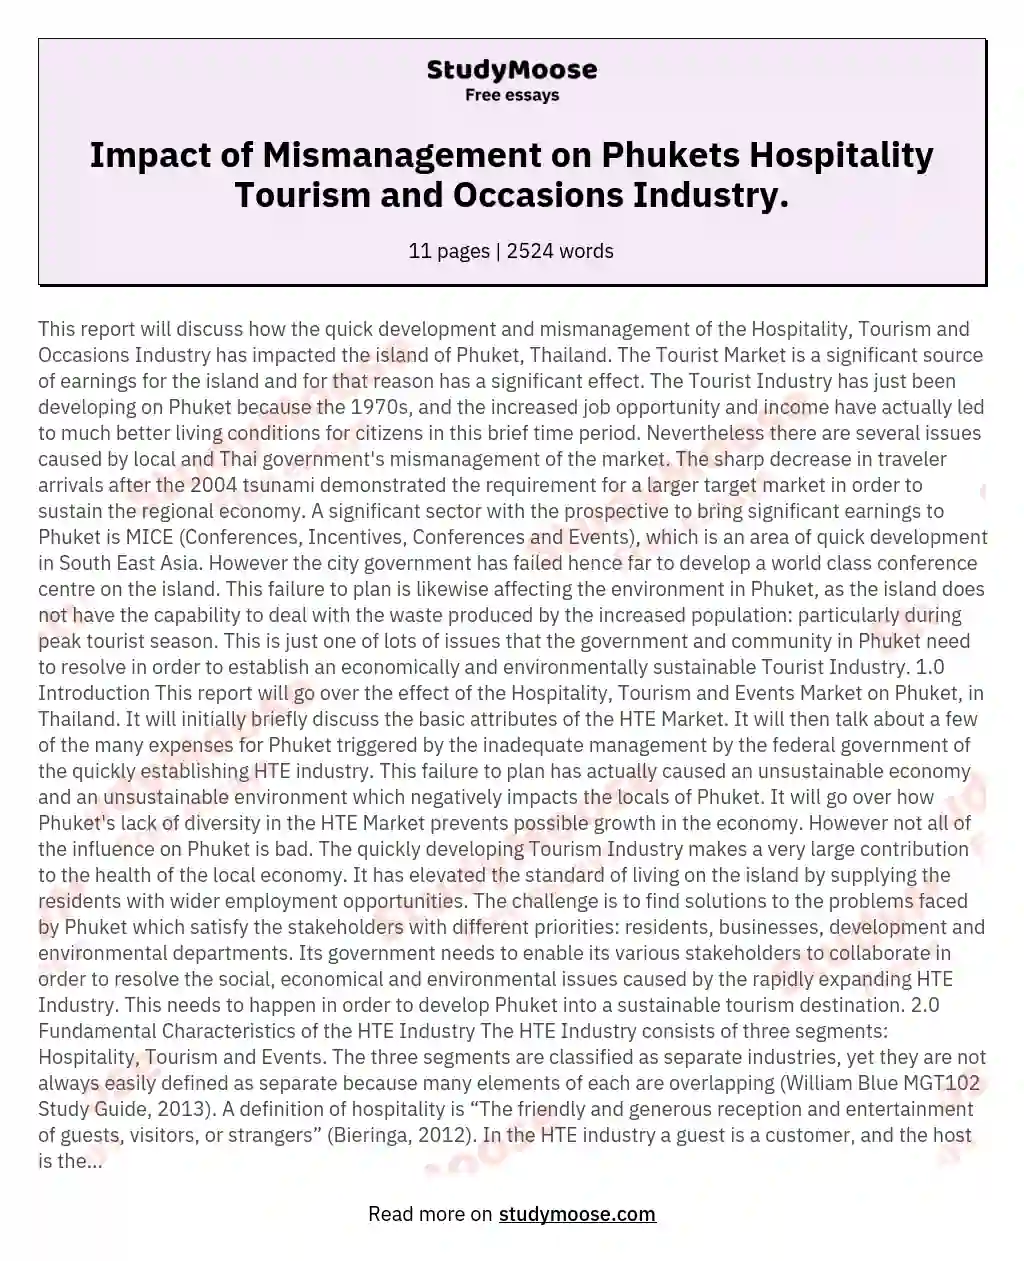 Impact of Mismanagement on Phukets Hospitality Tourism and Occasions Industry. essay